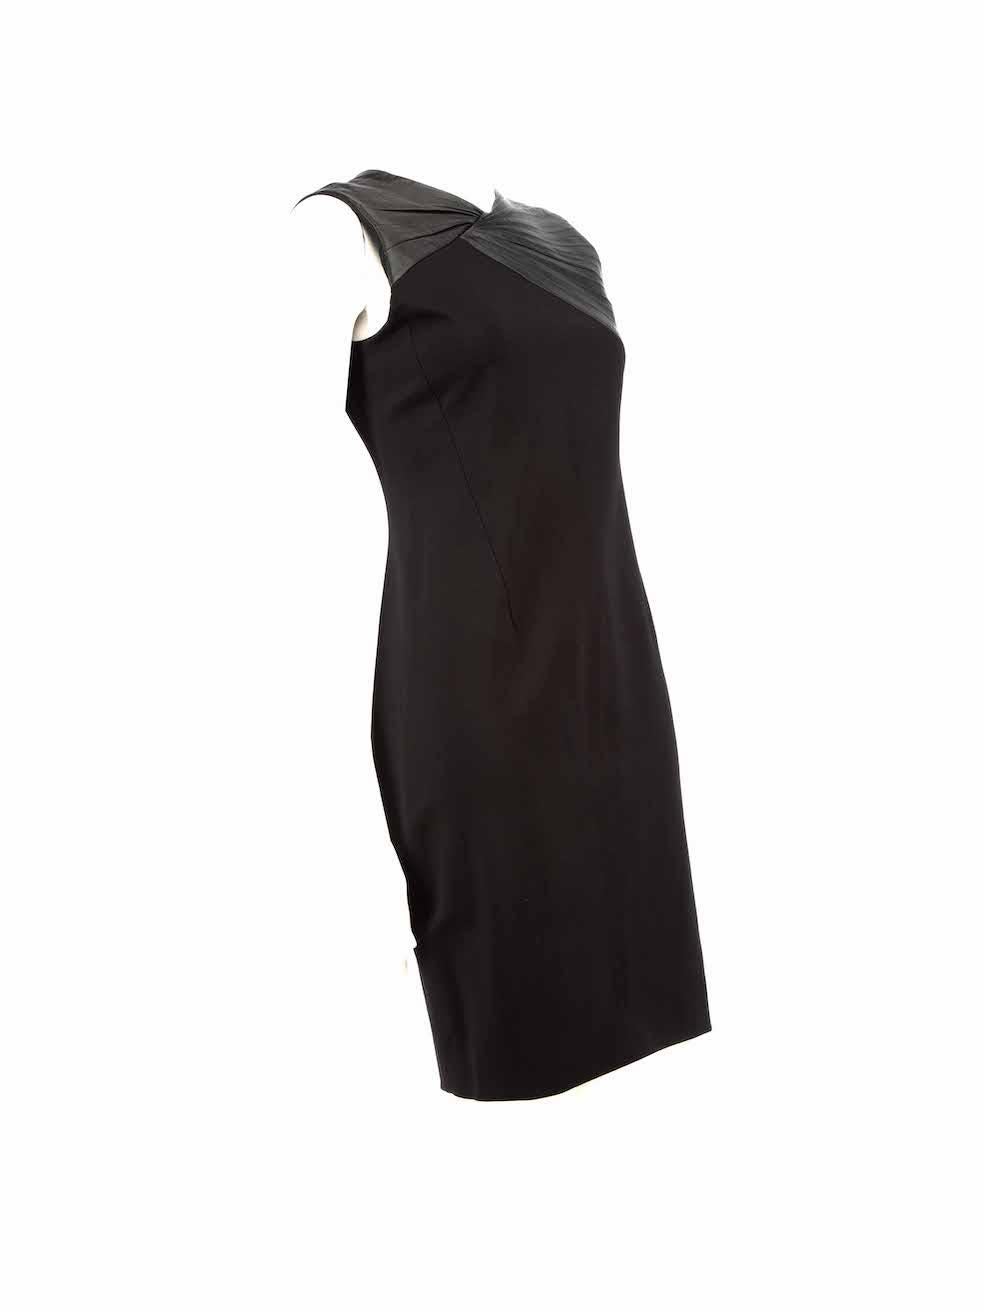 CONDITION is Very good. Minimal wear to dress is evident. Minimal wear to the dress is seen on the leather detailing with abrasion marks on this used Halston Heritage designer resale item.
 
 
 
 Details
 
 
 Black
 
 Viscose
 
 Dress
 
 Knee